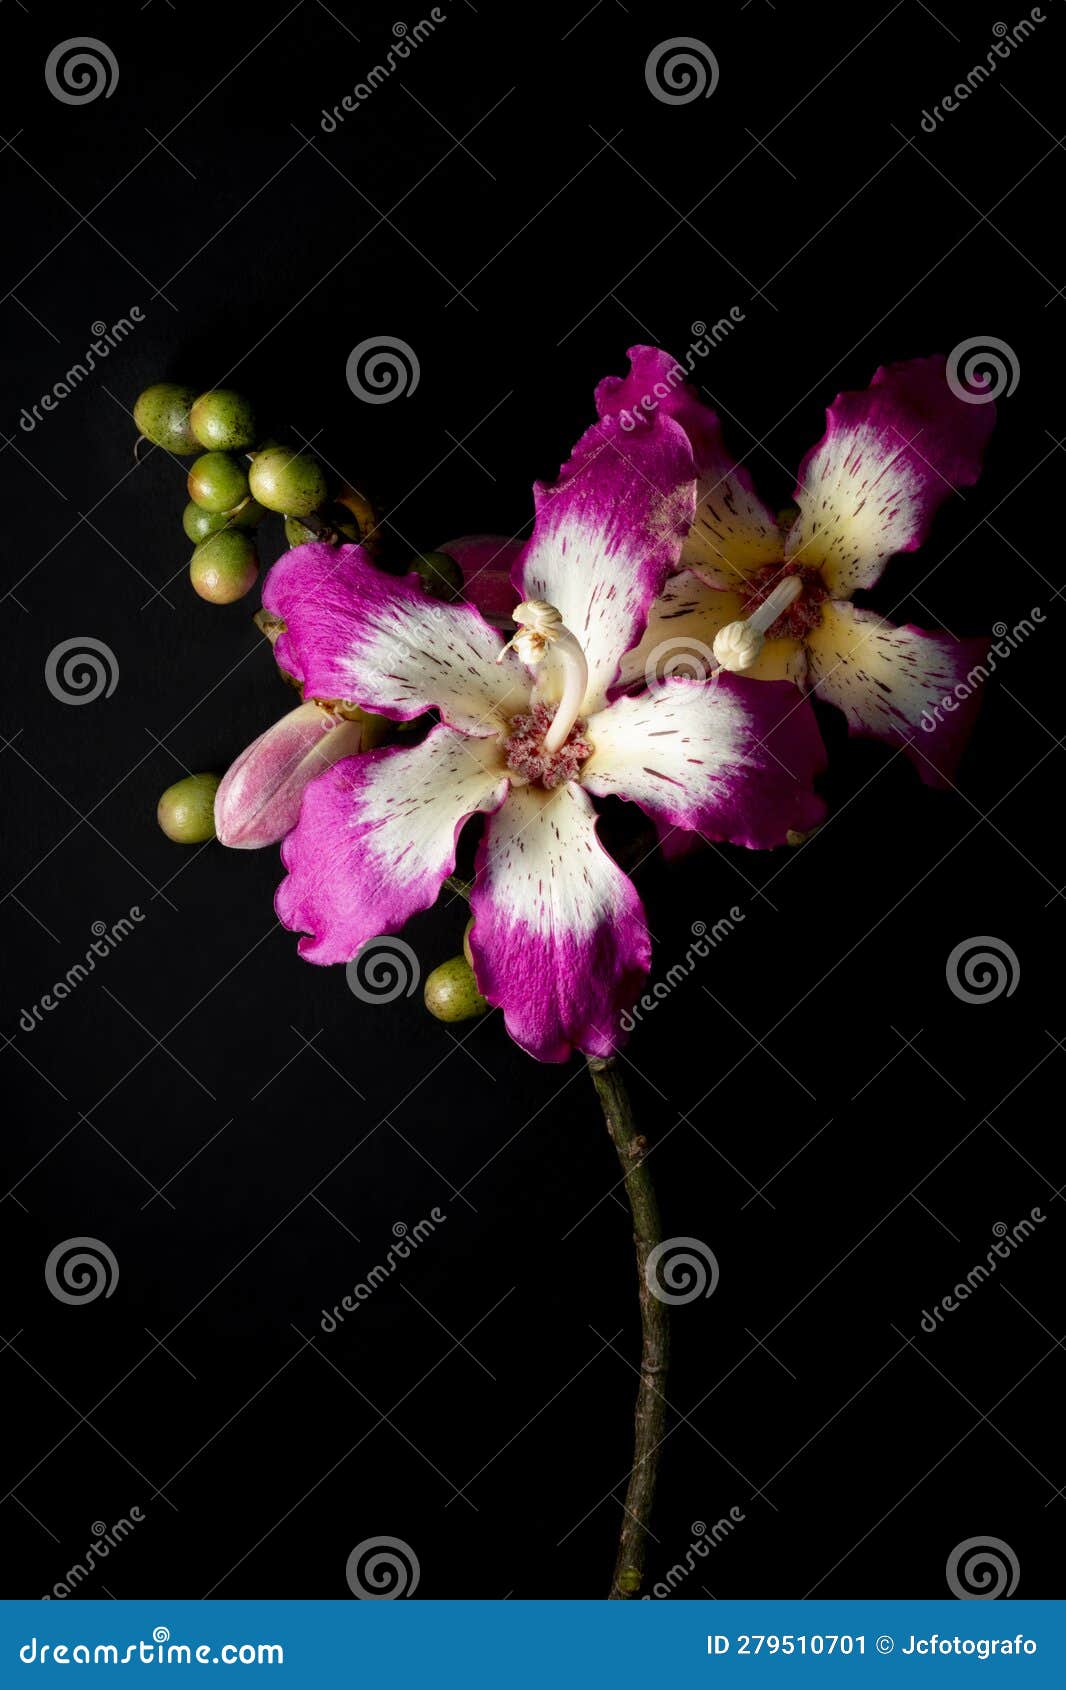 pink and white ceiba floral ornament on black background